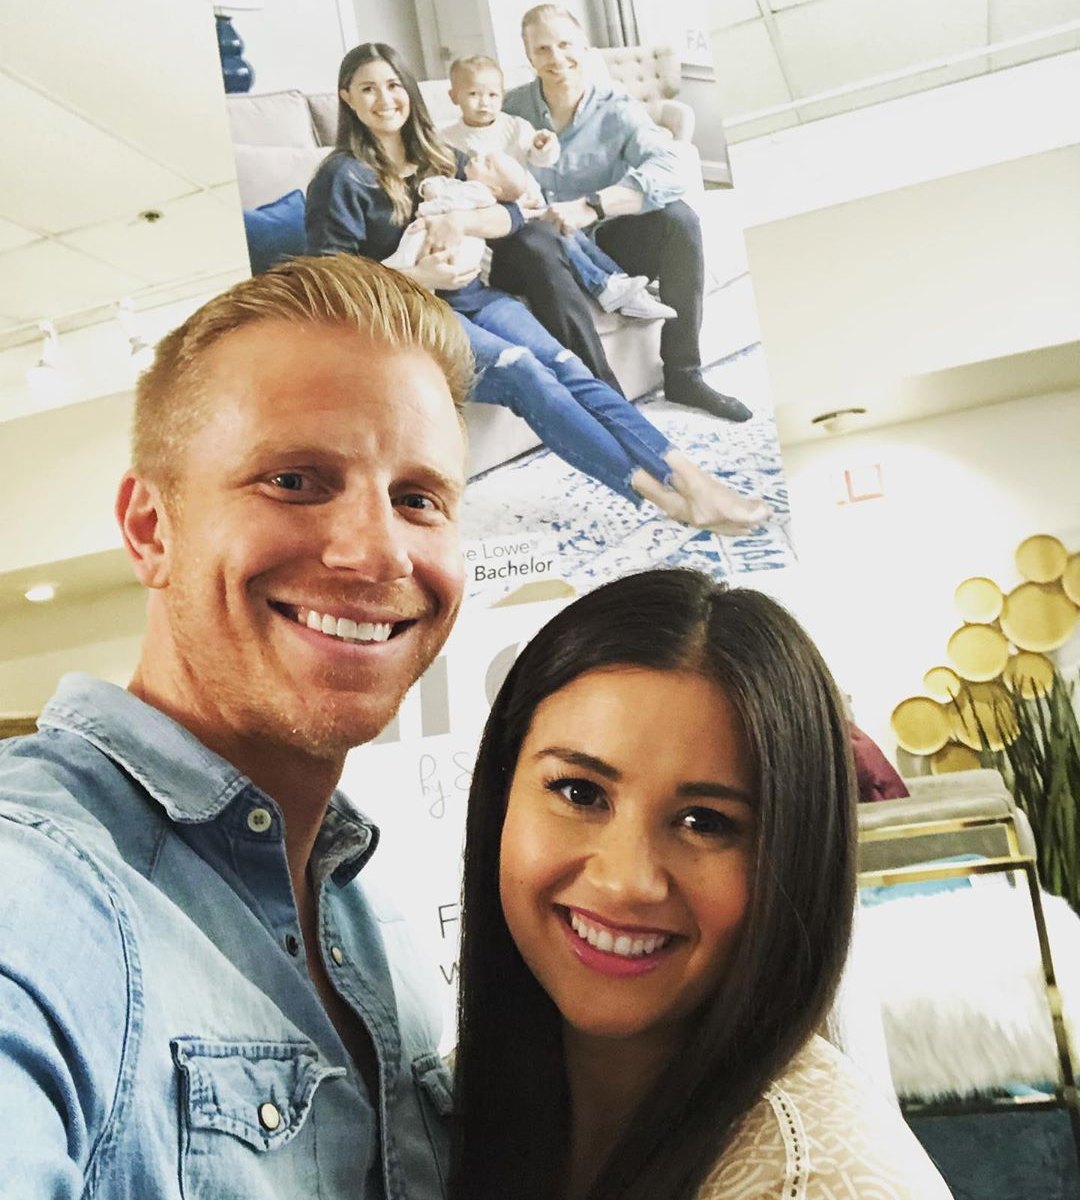 Sean Lowe on X: My wife bought this party size bag of Peanut